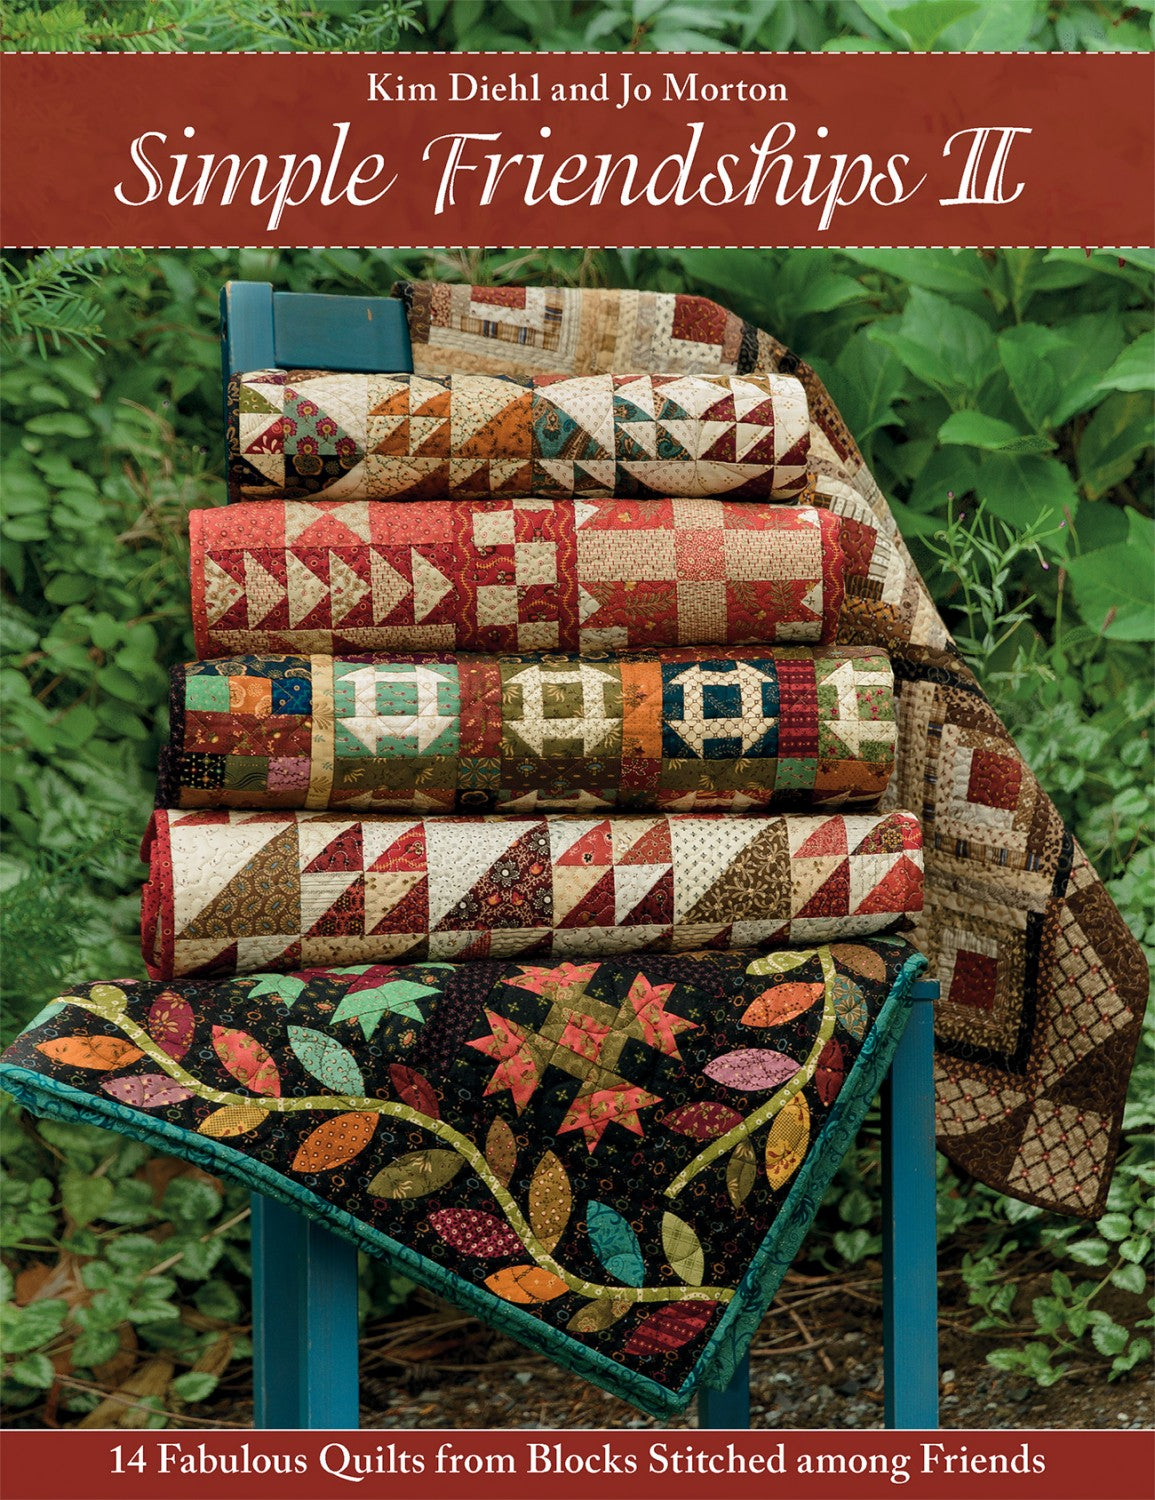 Simple Friendships 11 by Kim Diehl and Jo Morton